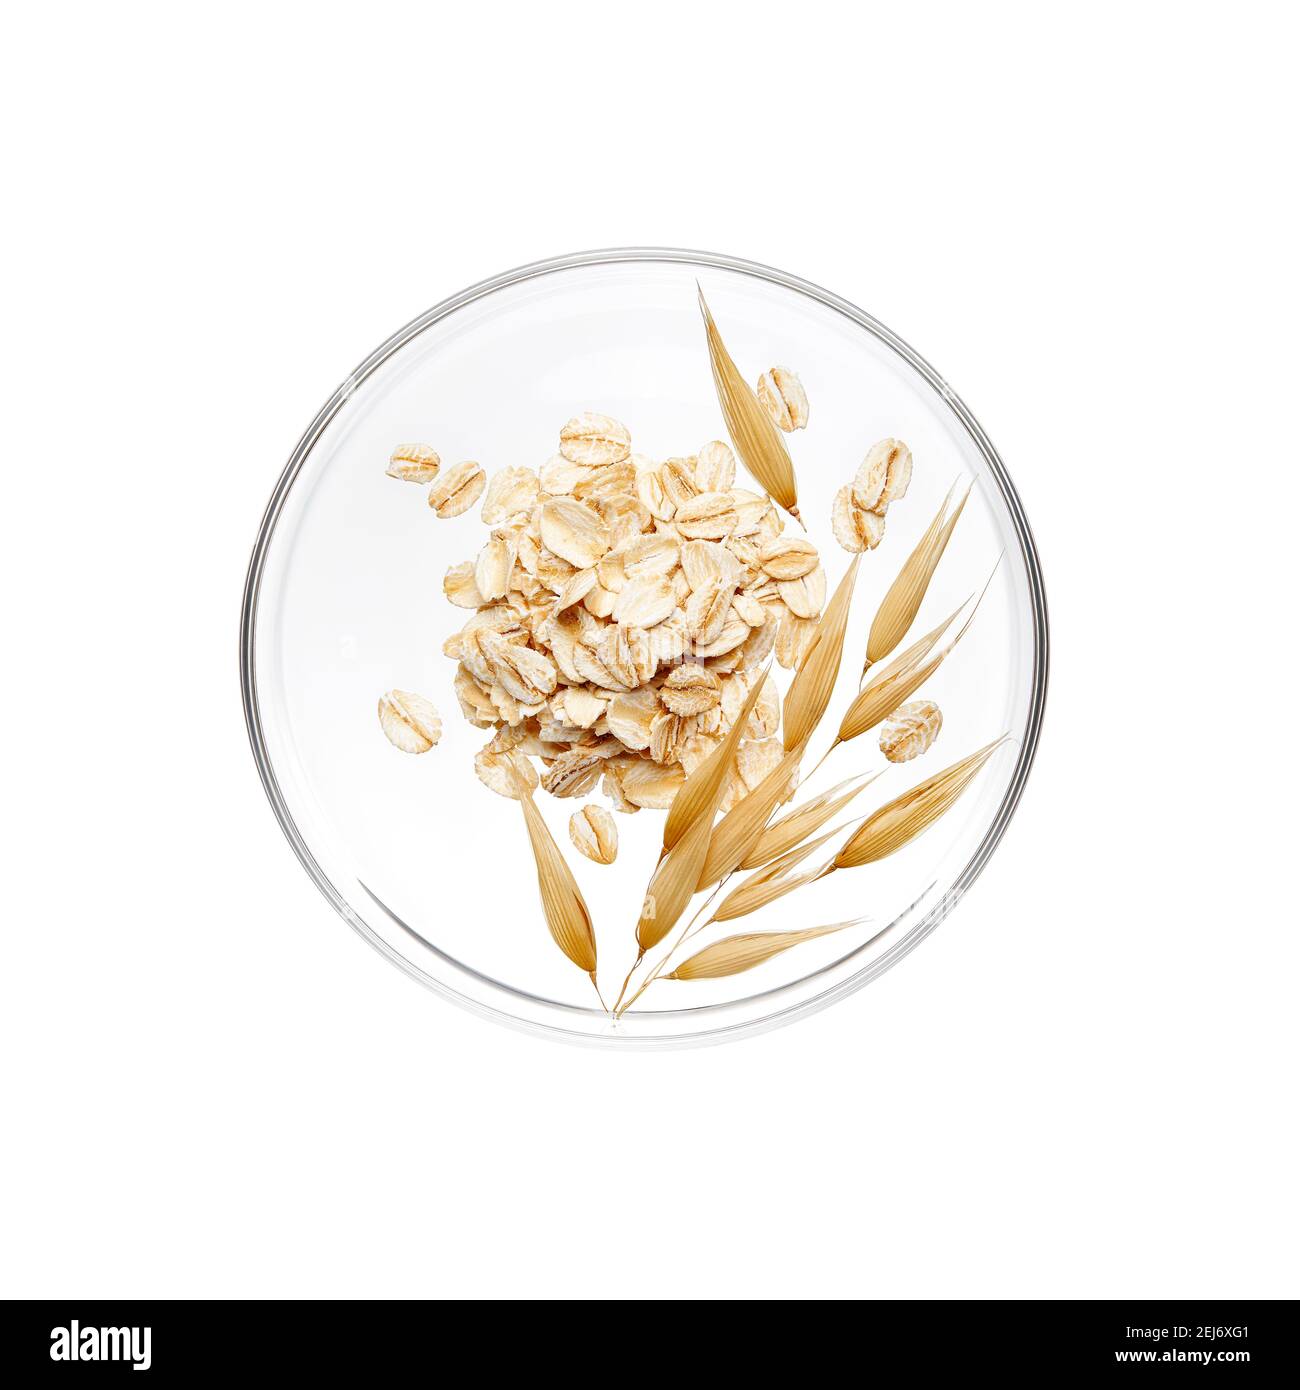 Pile of oatmeal and its plant on petri dish over white background Stock Photo